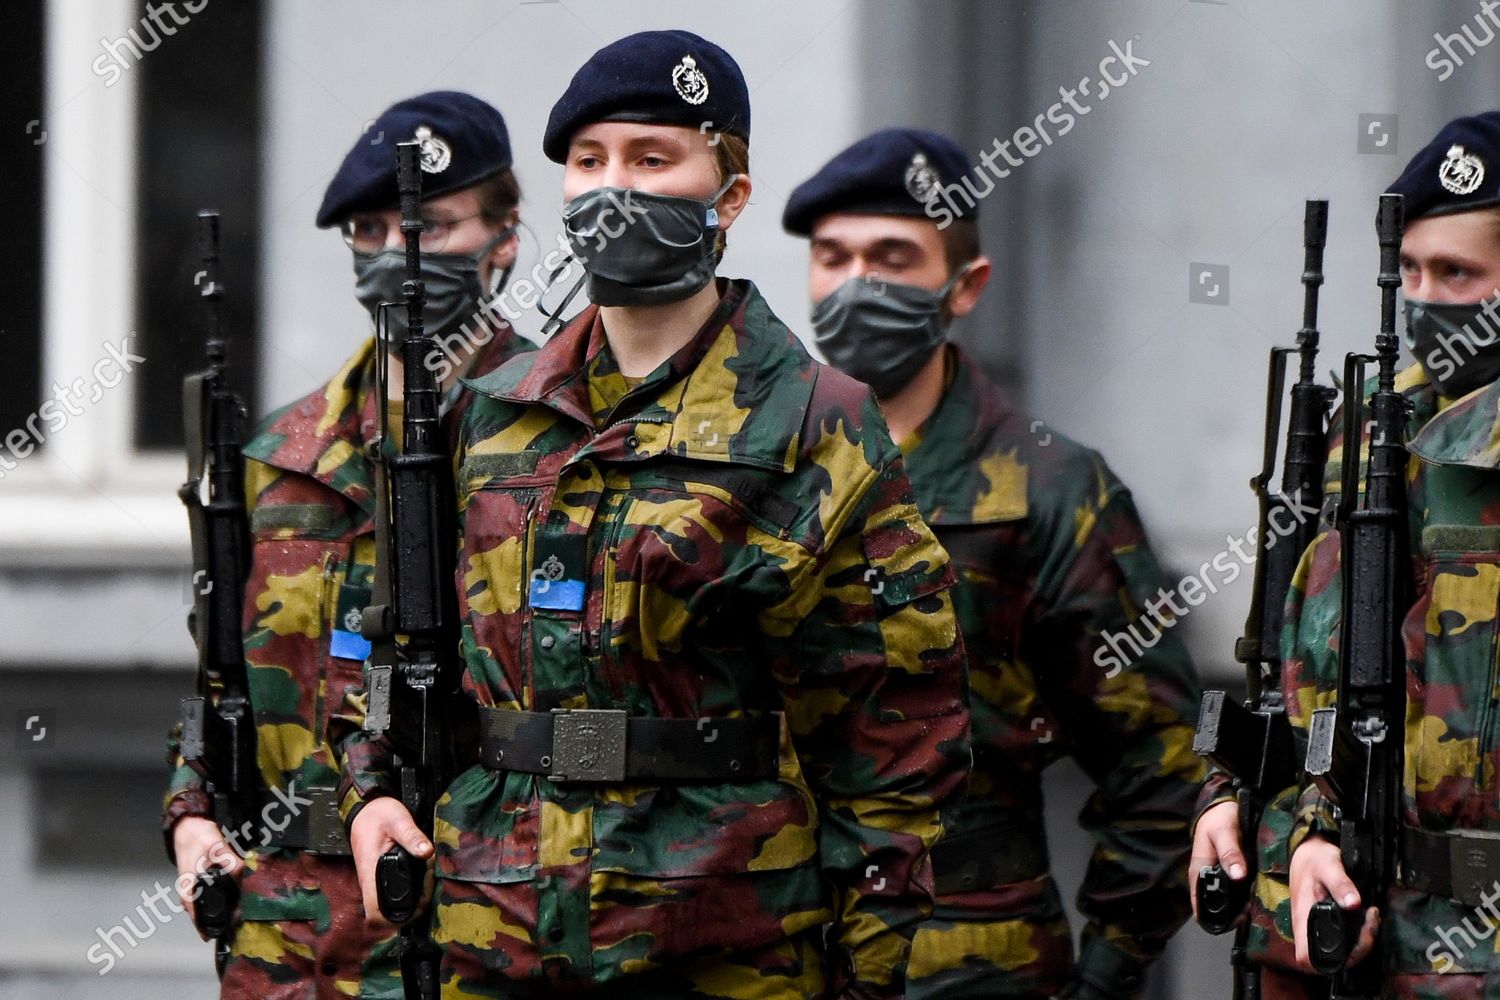 belgian-royals-attend-ceremony-for-the-presentation-of-the-blue-berets-royal-military-academy-erm-brussels-belgium-shutterstock-editorial-10790437f.jpg